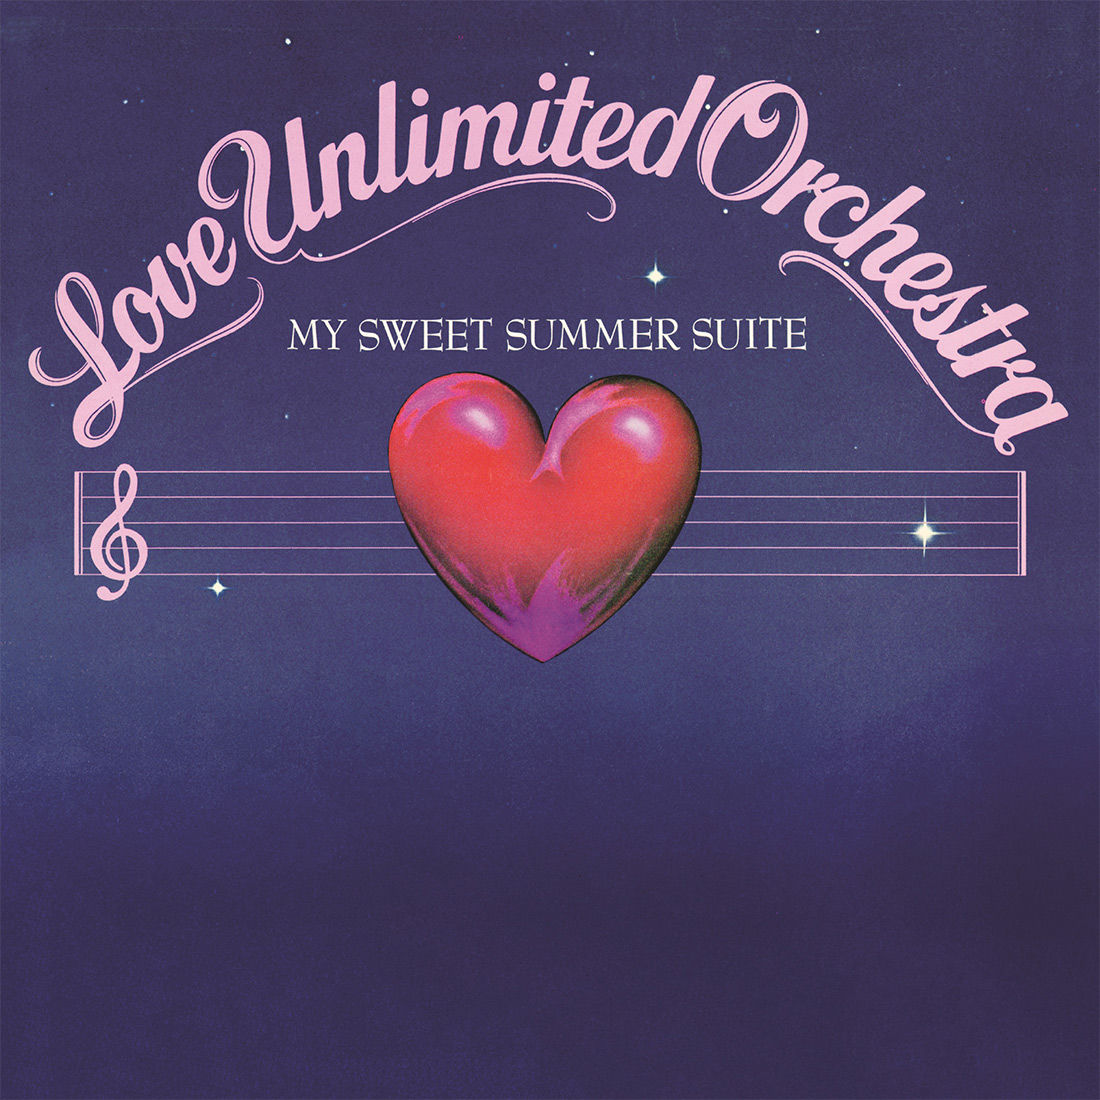 The Love Unlimited Orchestra - My Sweet Summer Suite: Vinyl LP